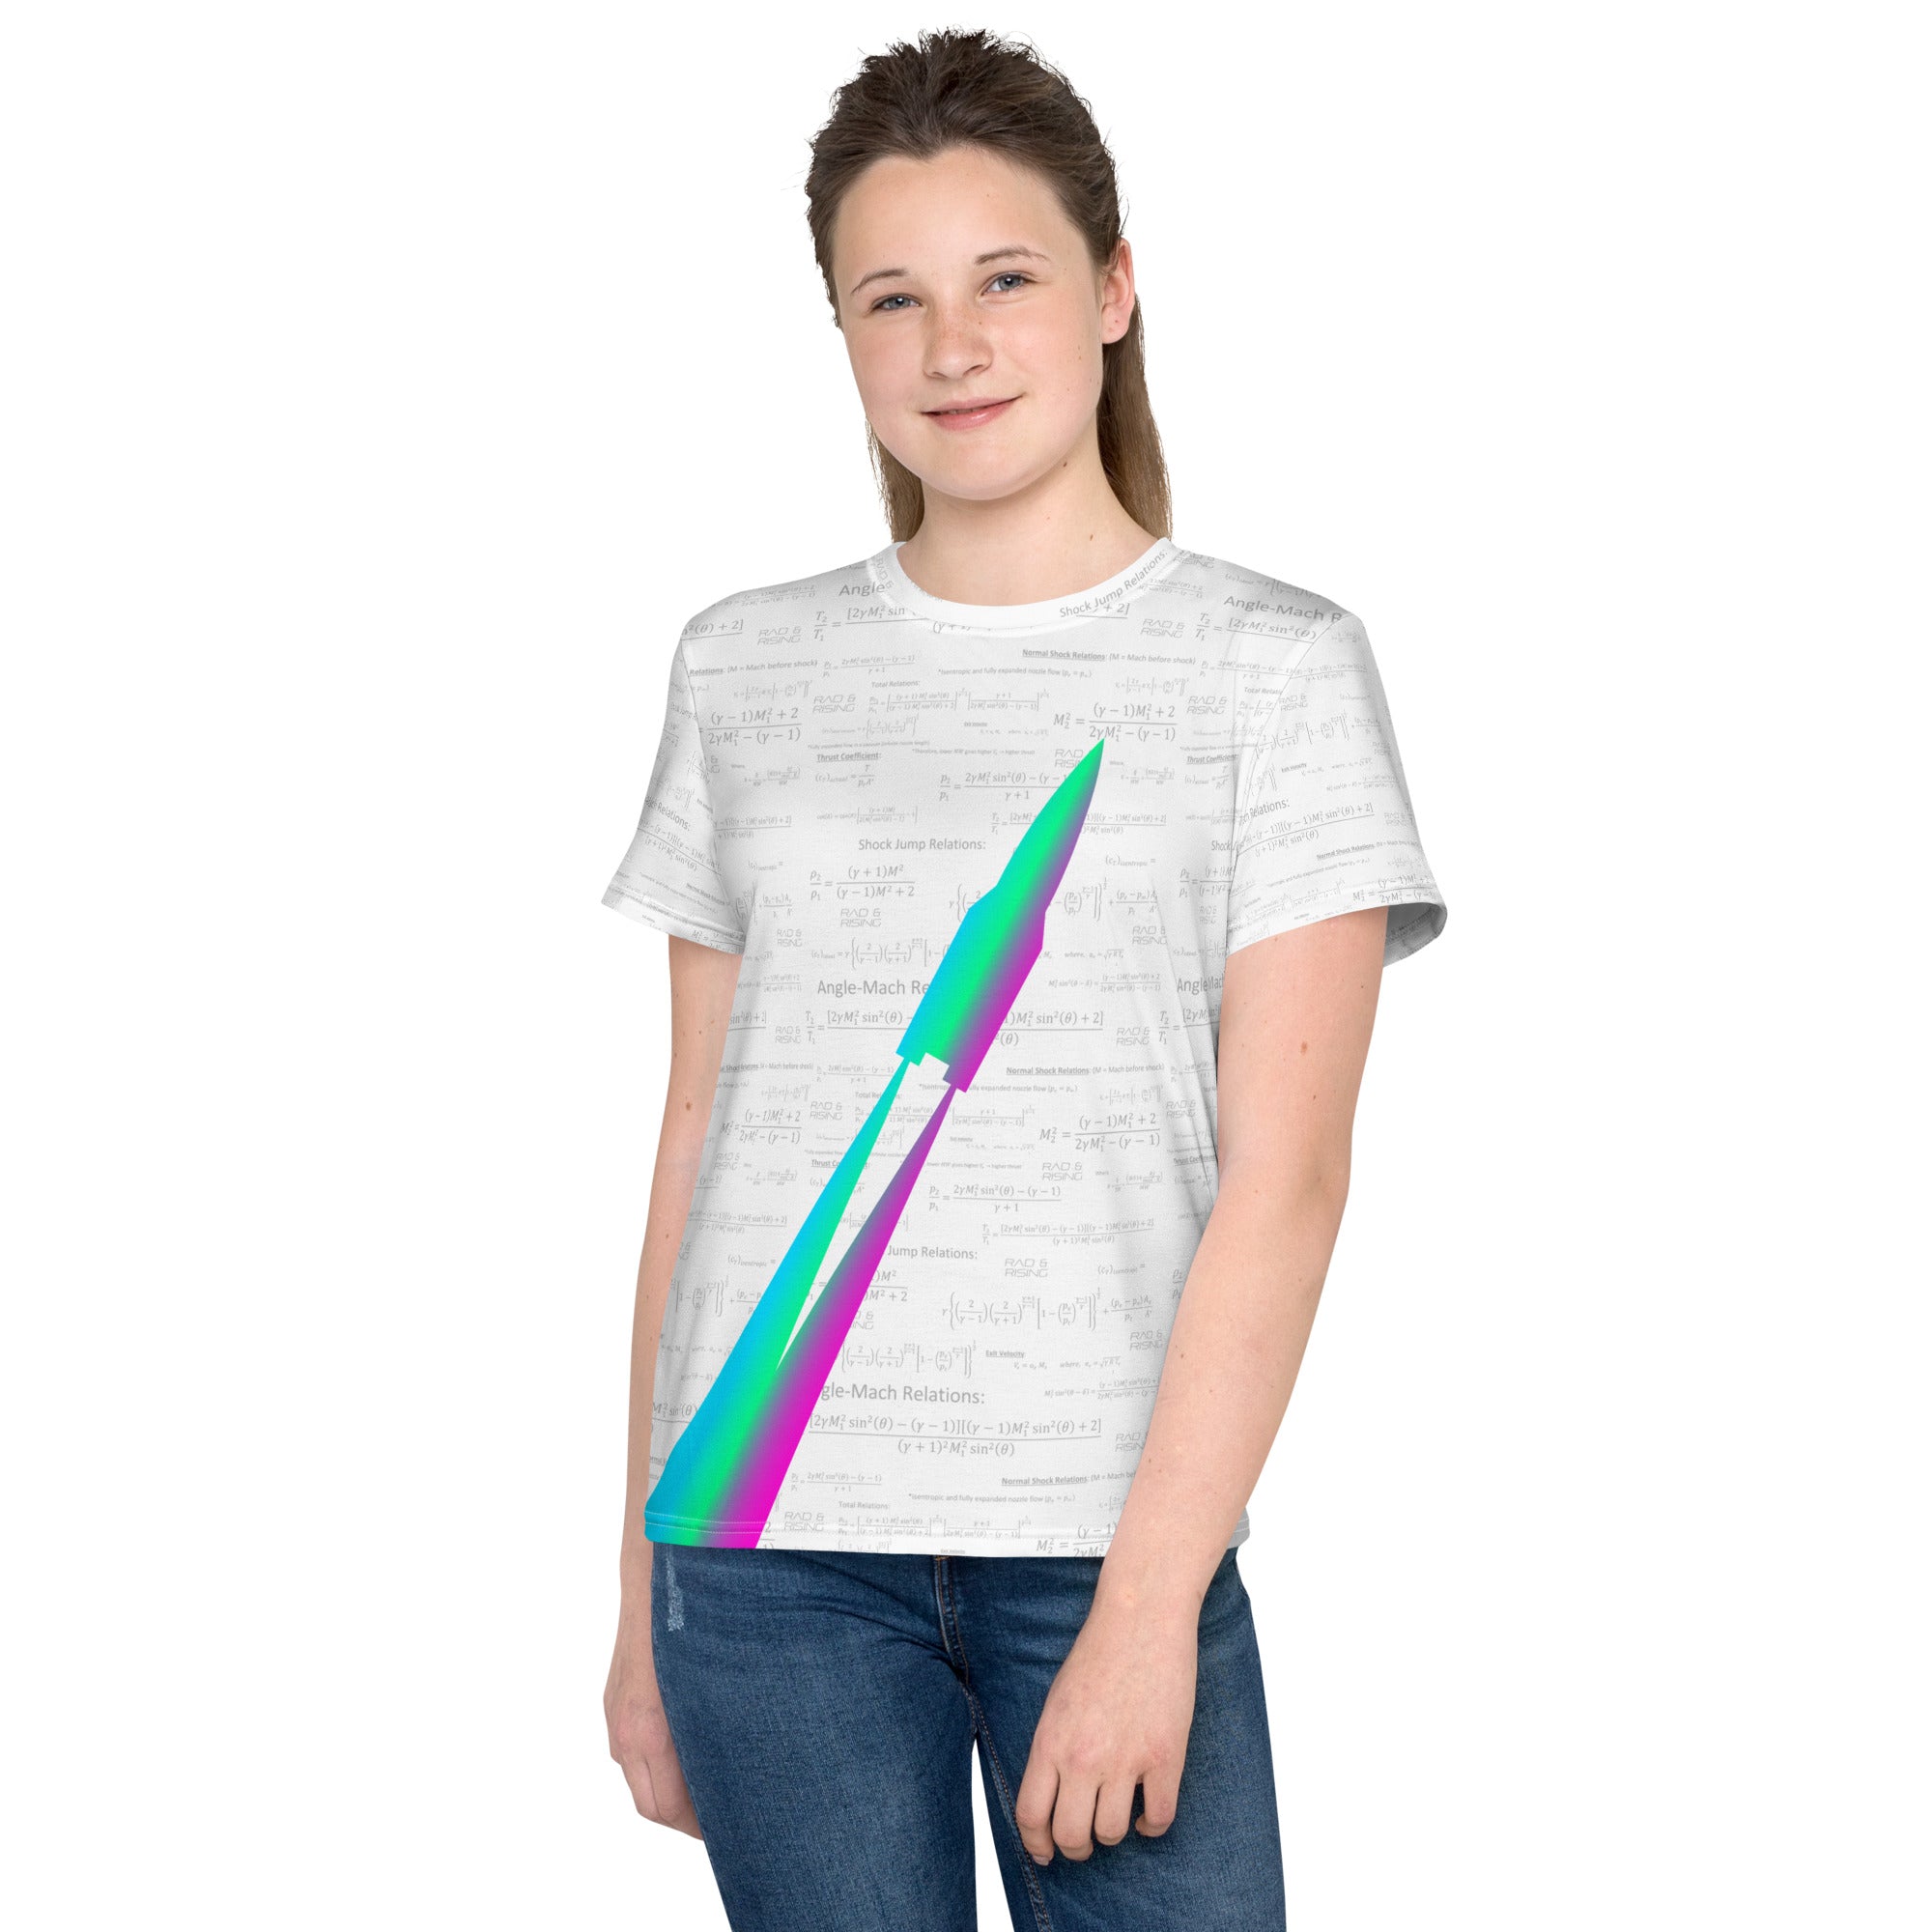 "Blastoff" with Rocket Math all over print Youth crew neck t-shirt